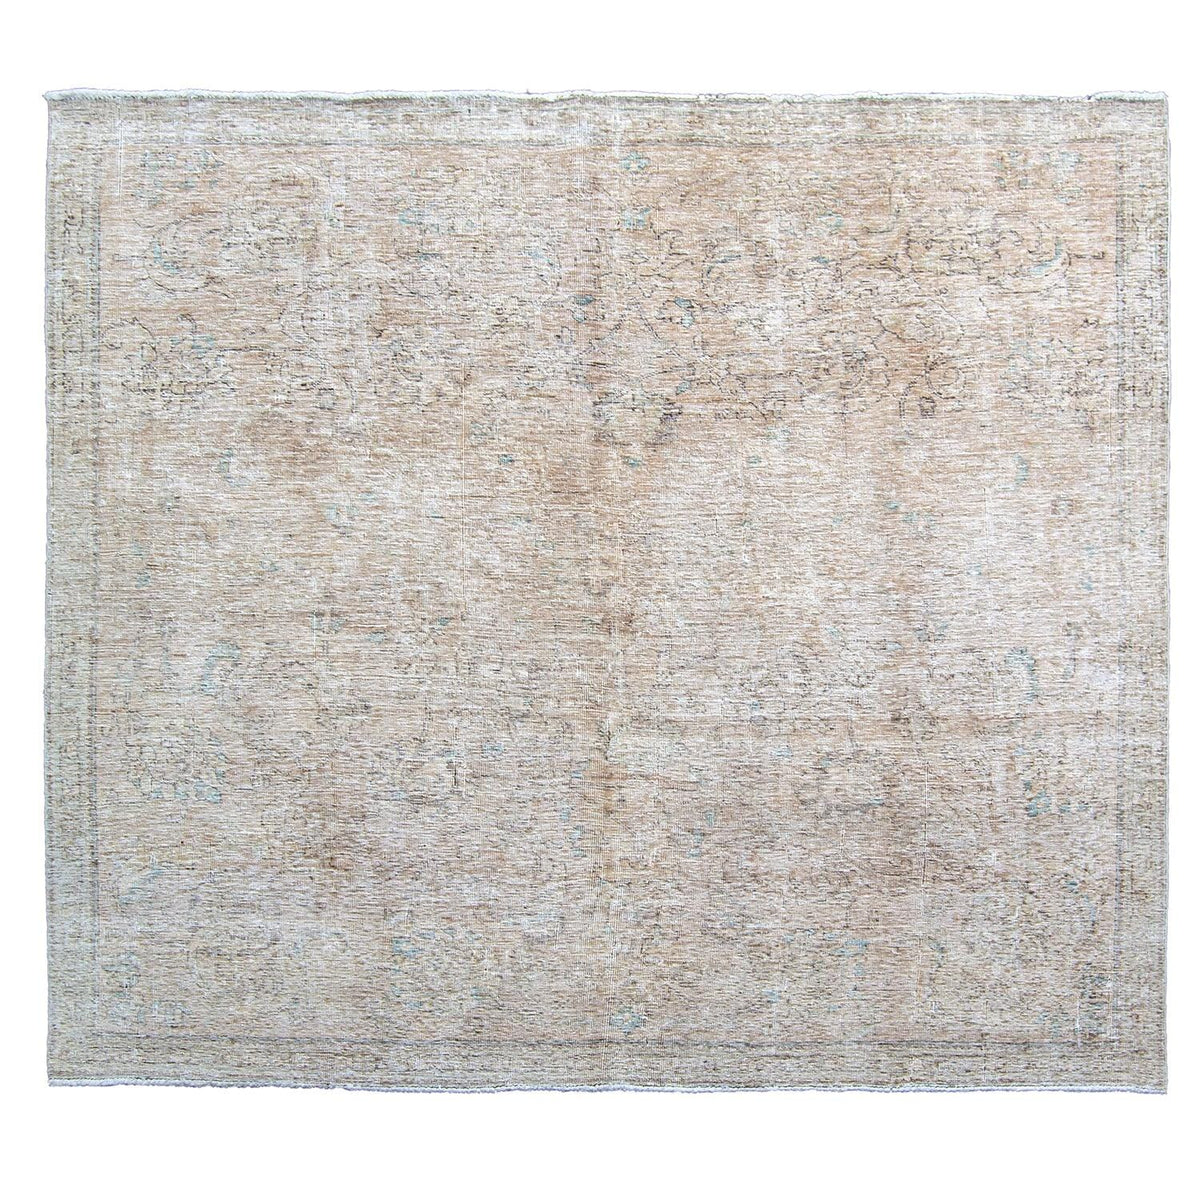 Hand-knotted Persian Vintage Rug 231cm x 230cm